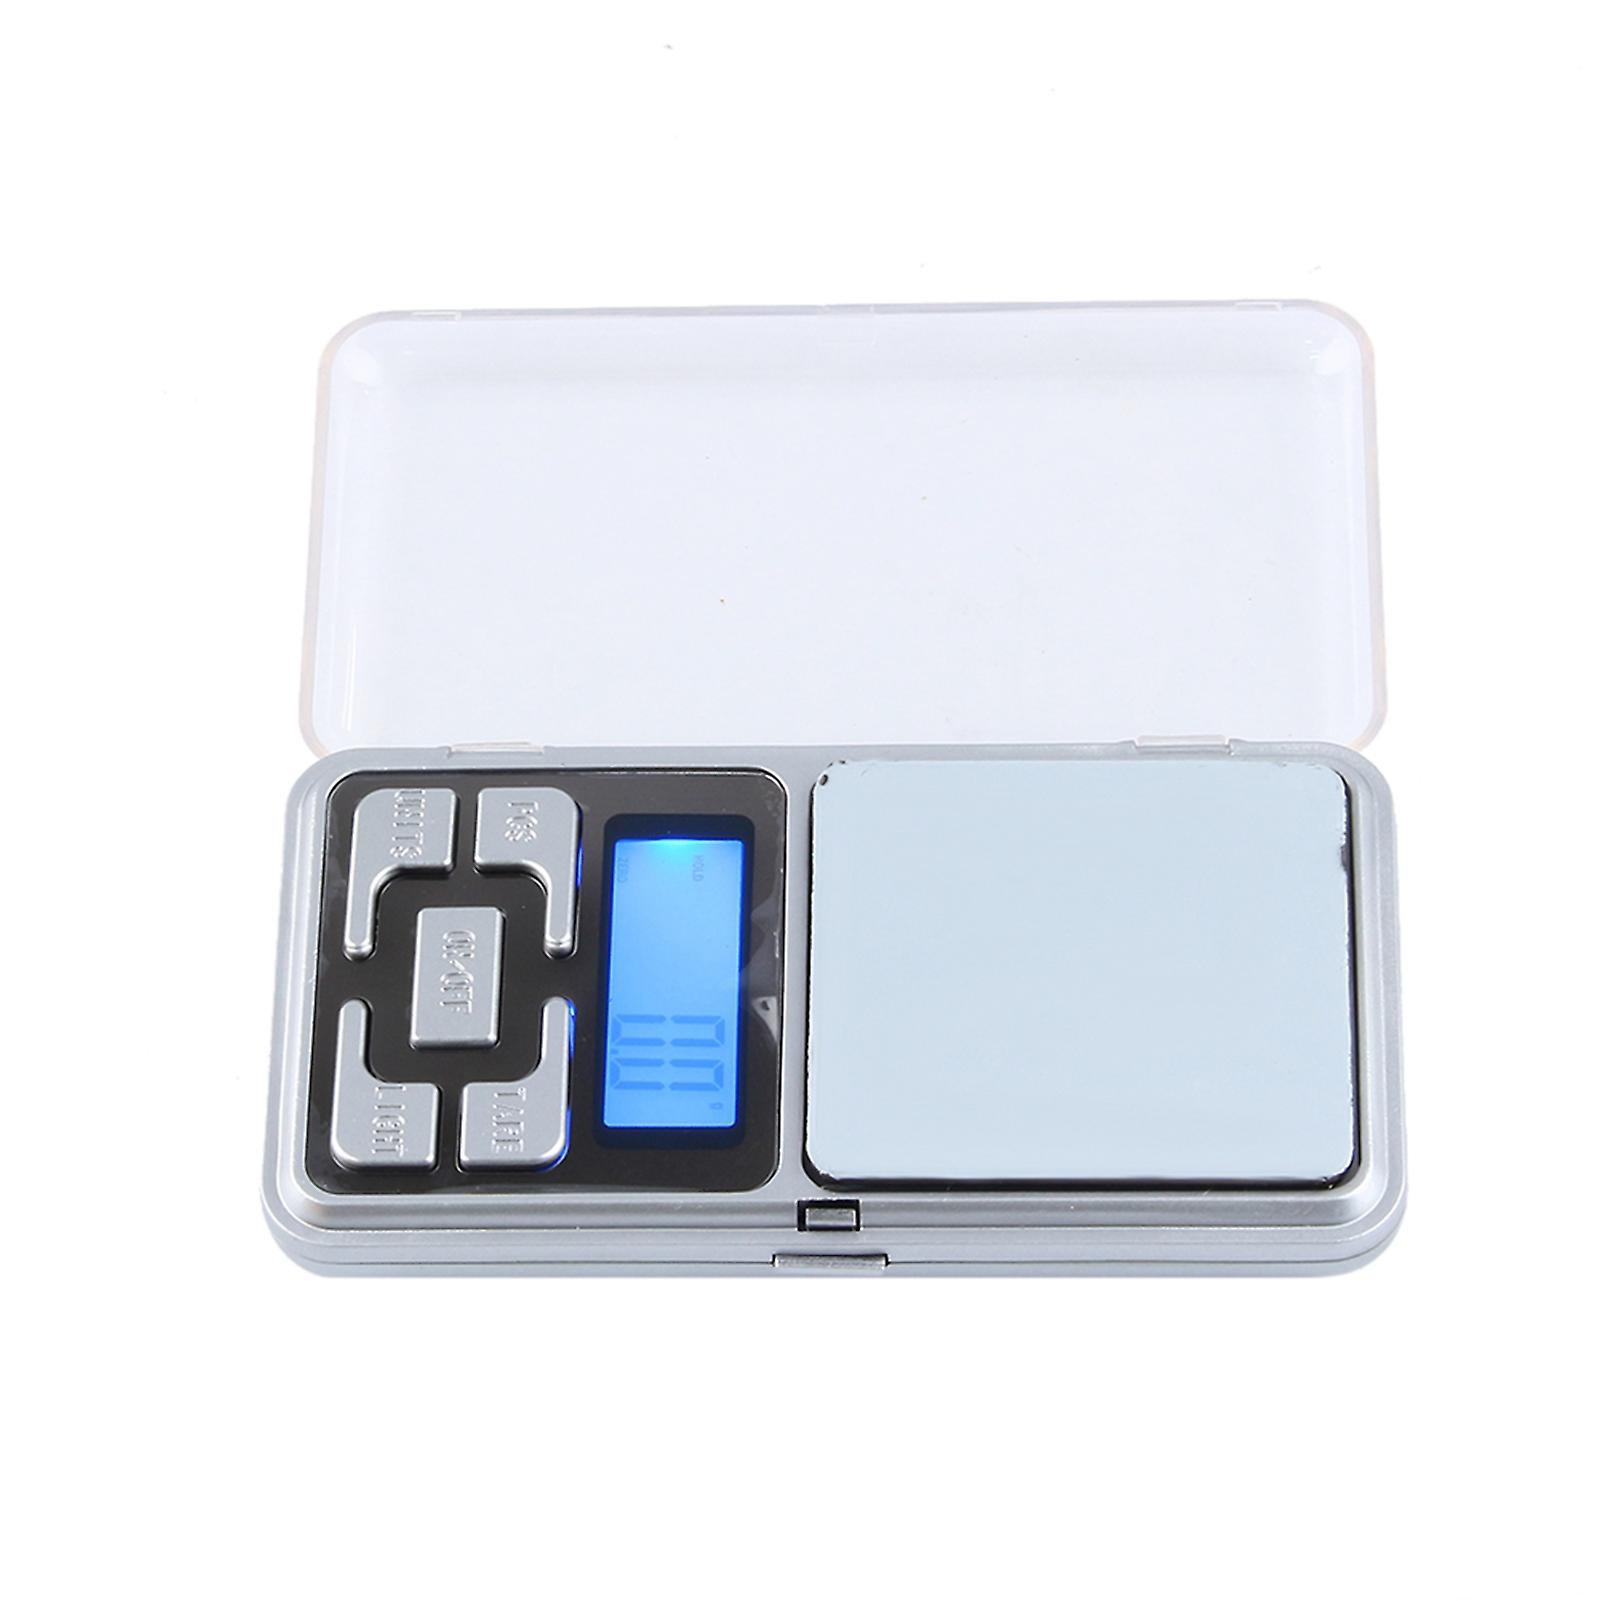 New 500g/0.1g Mini Electronic Digital Balance Weighing Pocket Jewelry Scale Tool